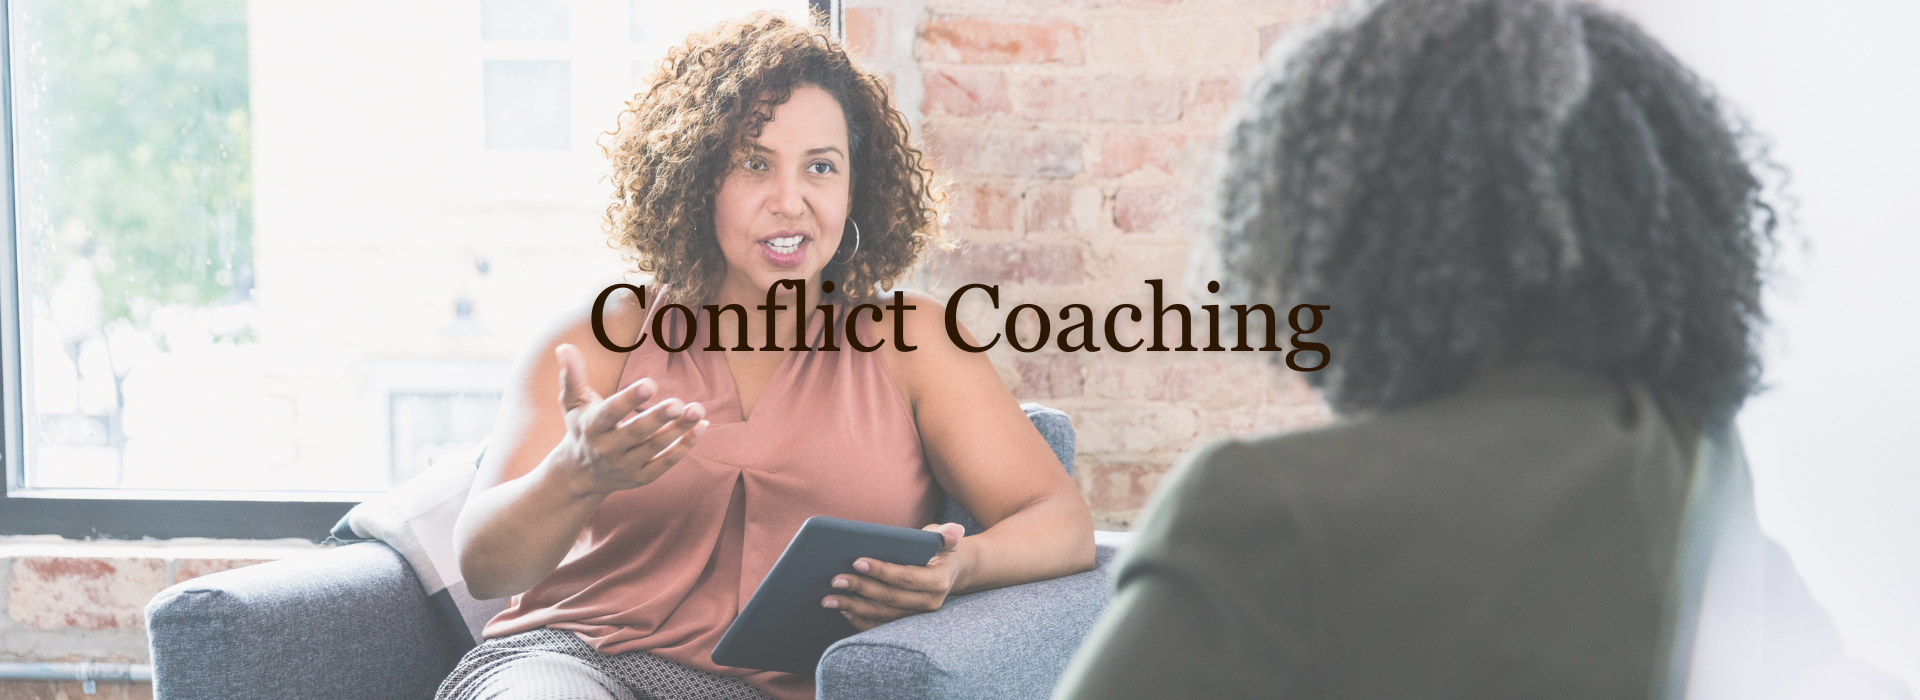 Conflict Coaching for Landlords